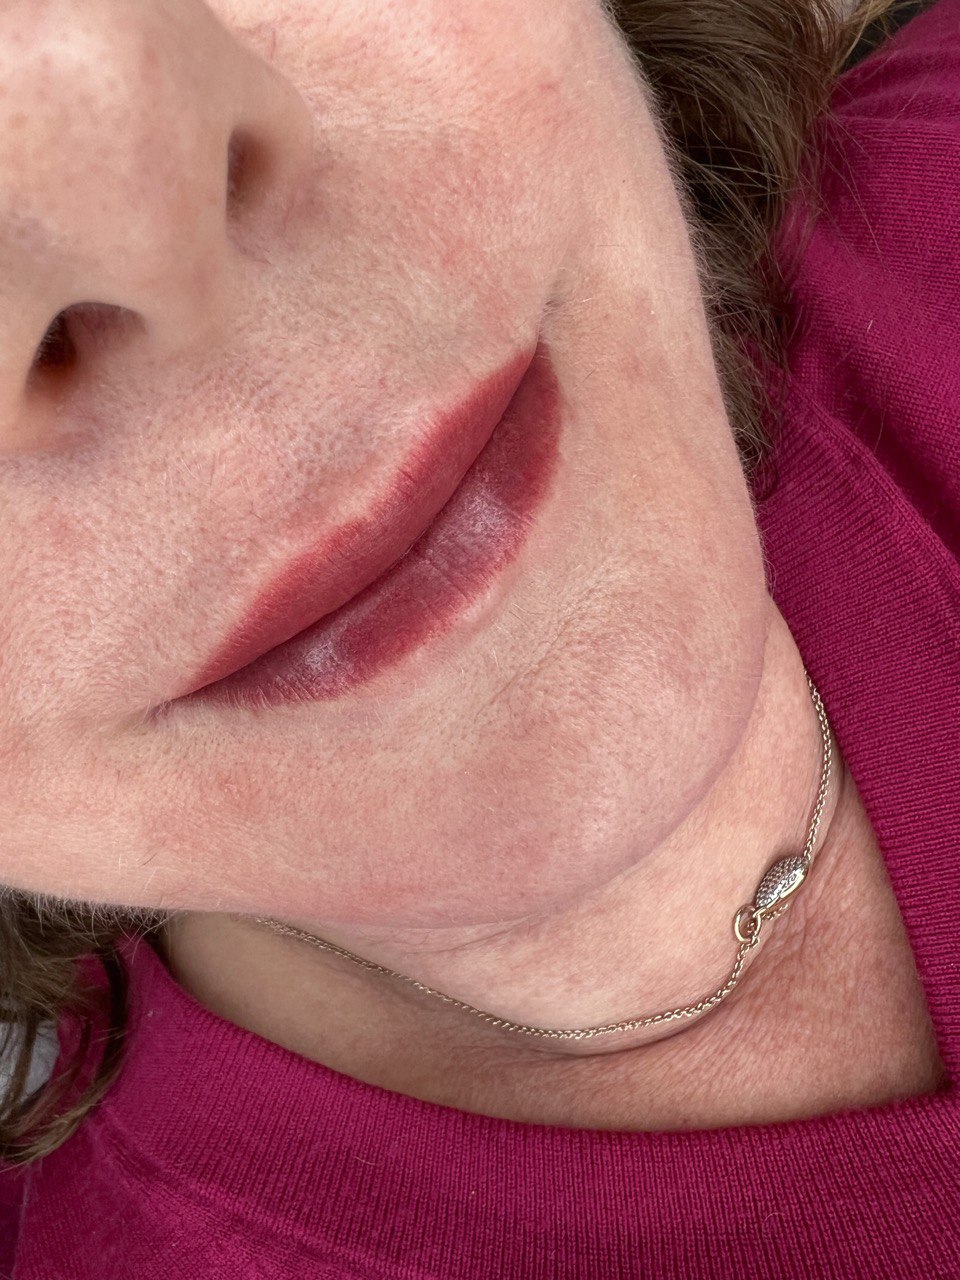 Lip Blush Tattoo. Cosmetic and Mediical Tattoo by Dasha. Permanent makeup and reconstructive tattoo, scalp micro-pigmentation in Christchurch, New Zealand